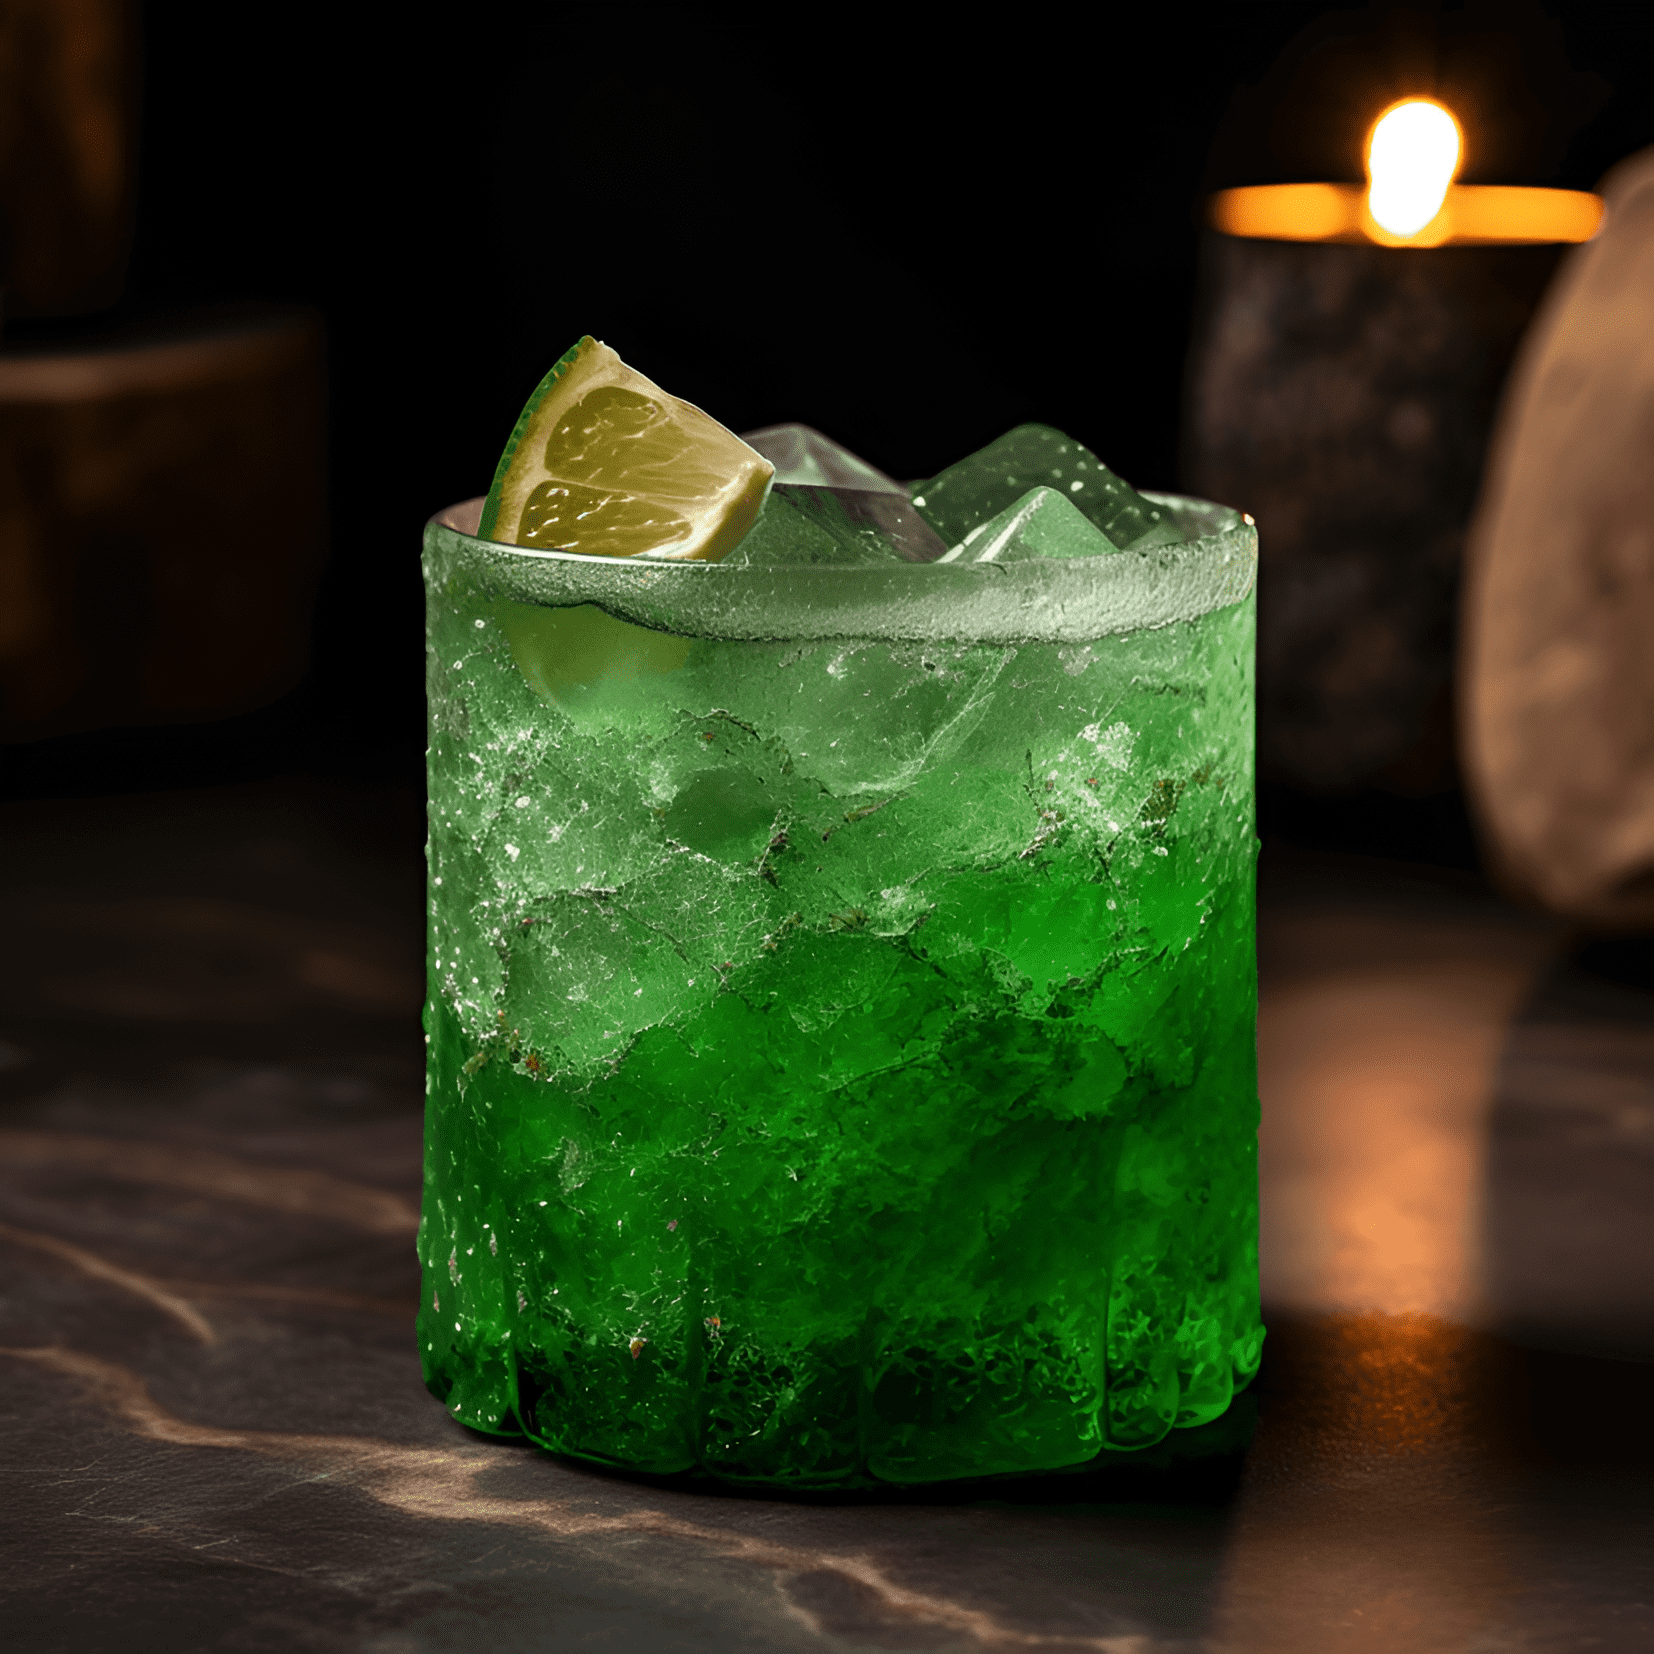 Peyote Cocktail Recipe - The Peyote cocktail offers a complex and intriguing taste profile, with sweet, sour, and herbal notes. The sweetness of the agave syrup balances the tartness of the lime juice, while the earthy flavors of the mezcal and cactus juice create a unique and memorable experience.